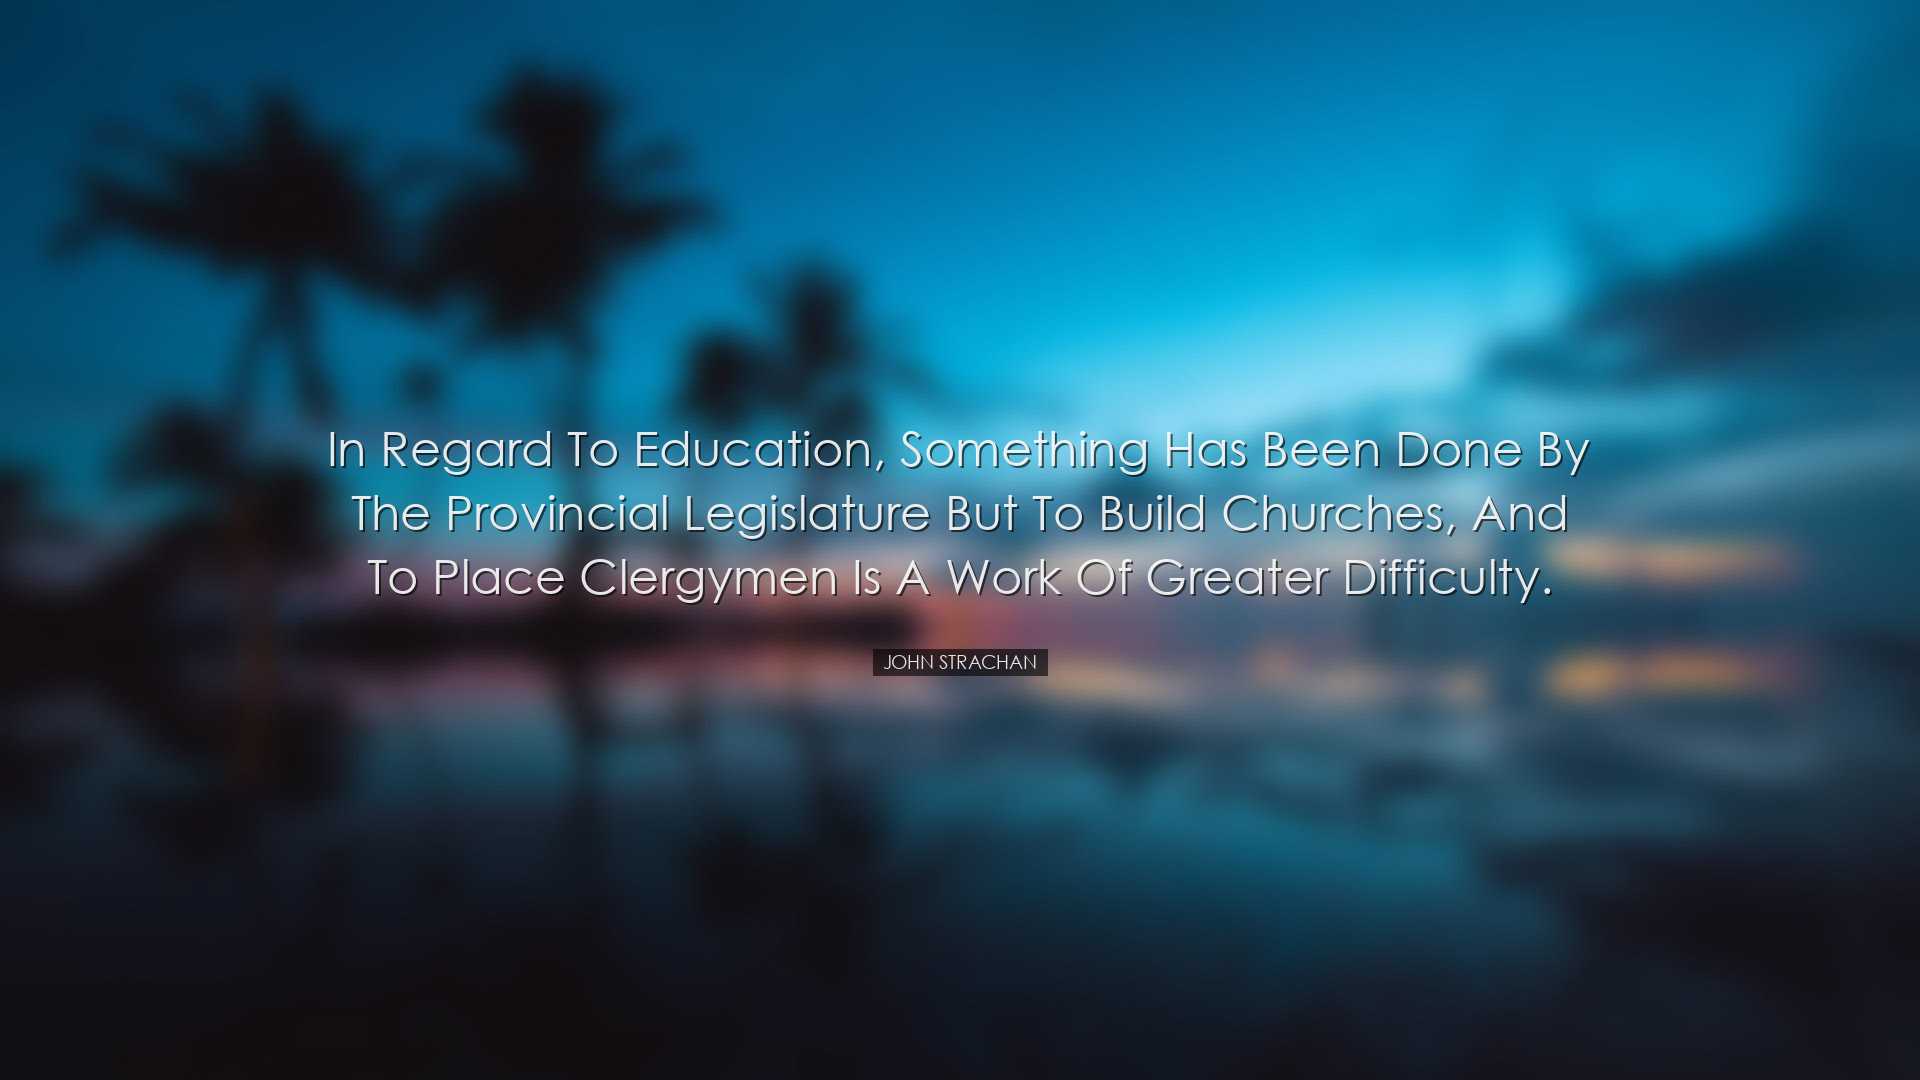 In regard to education, something has been done by the Provincial